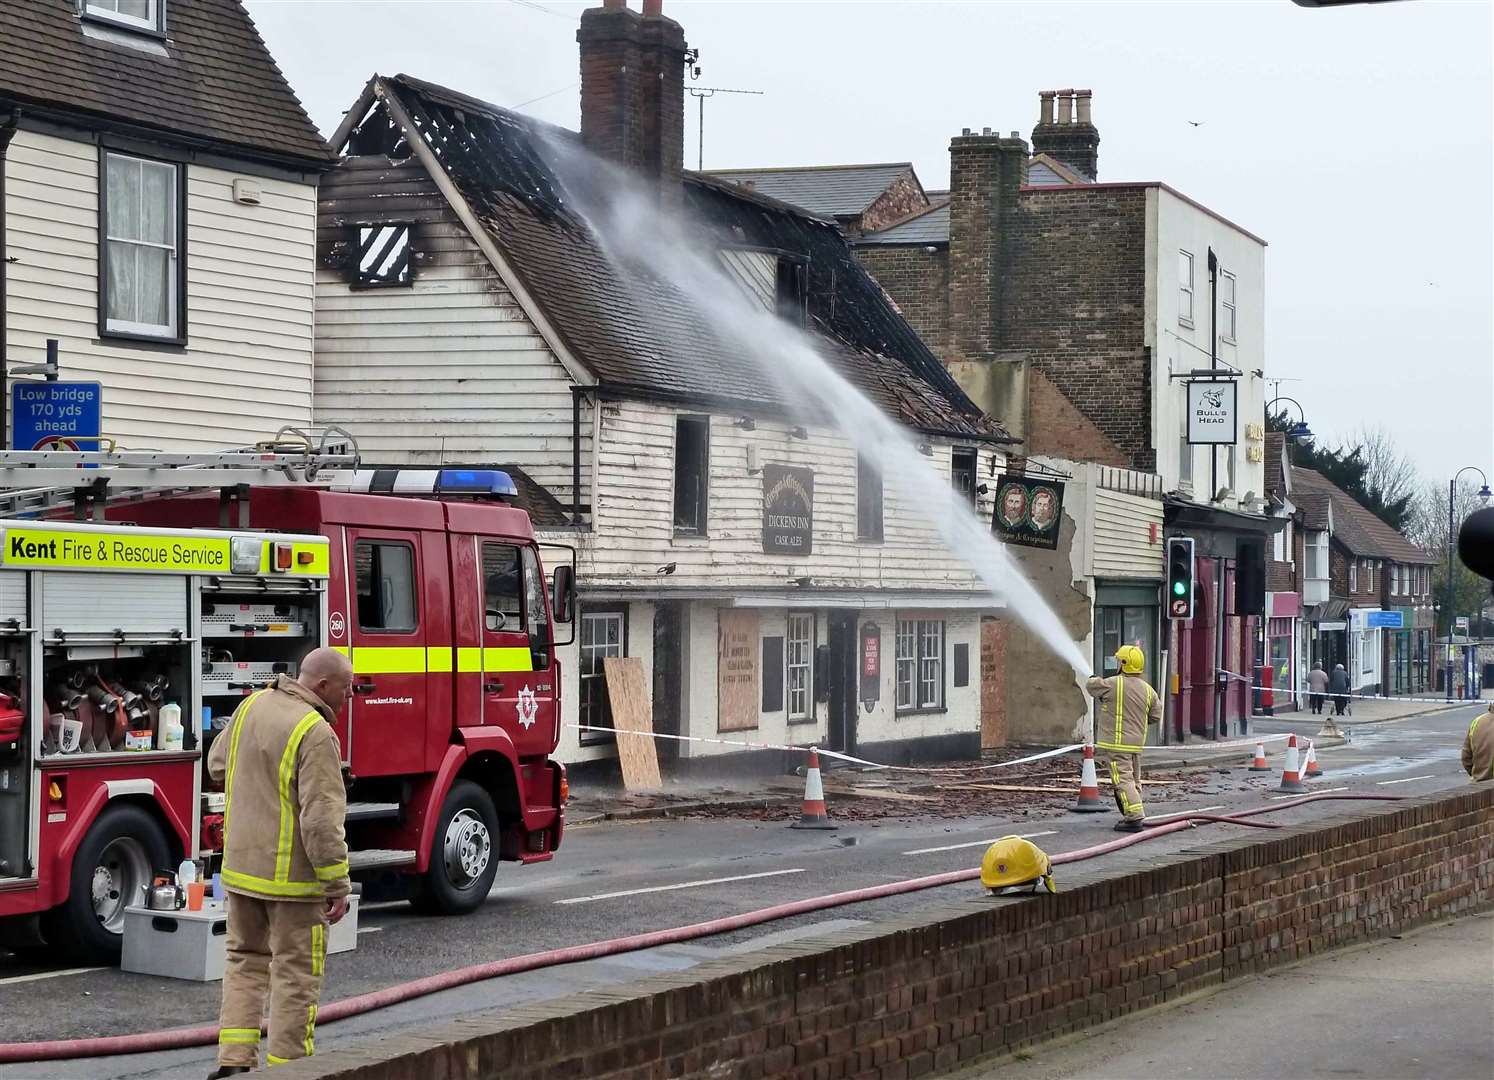 The Crispin and Crispianus pub in Strood dated back to the 1200s but was devastated by fire in 2011. Picture: William Shuter